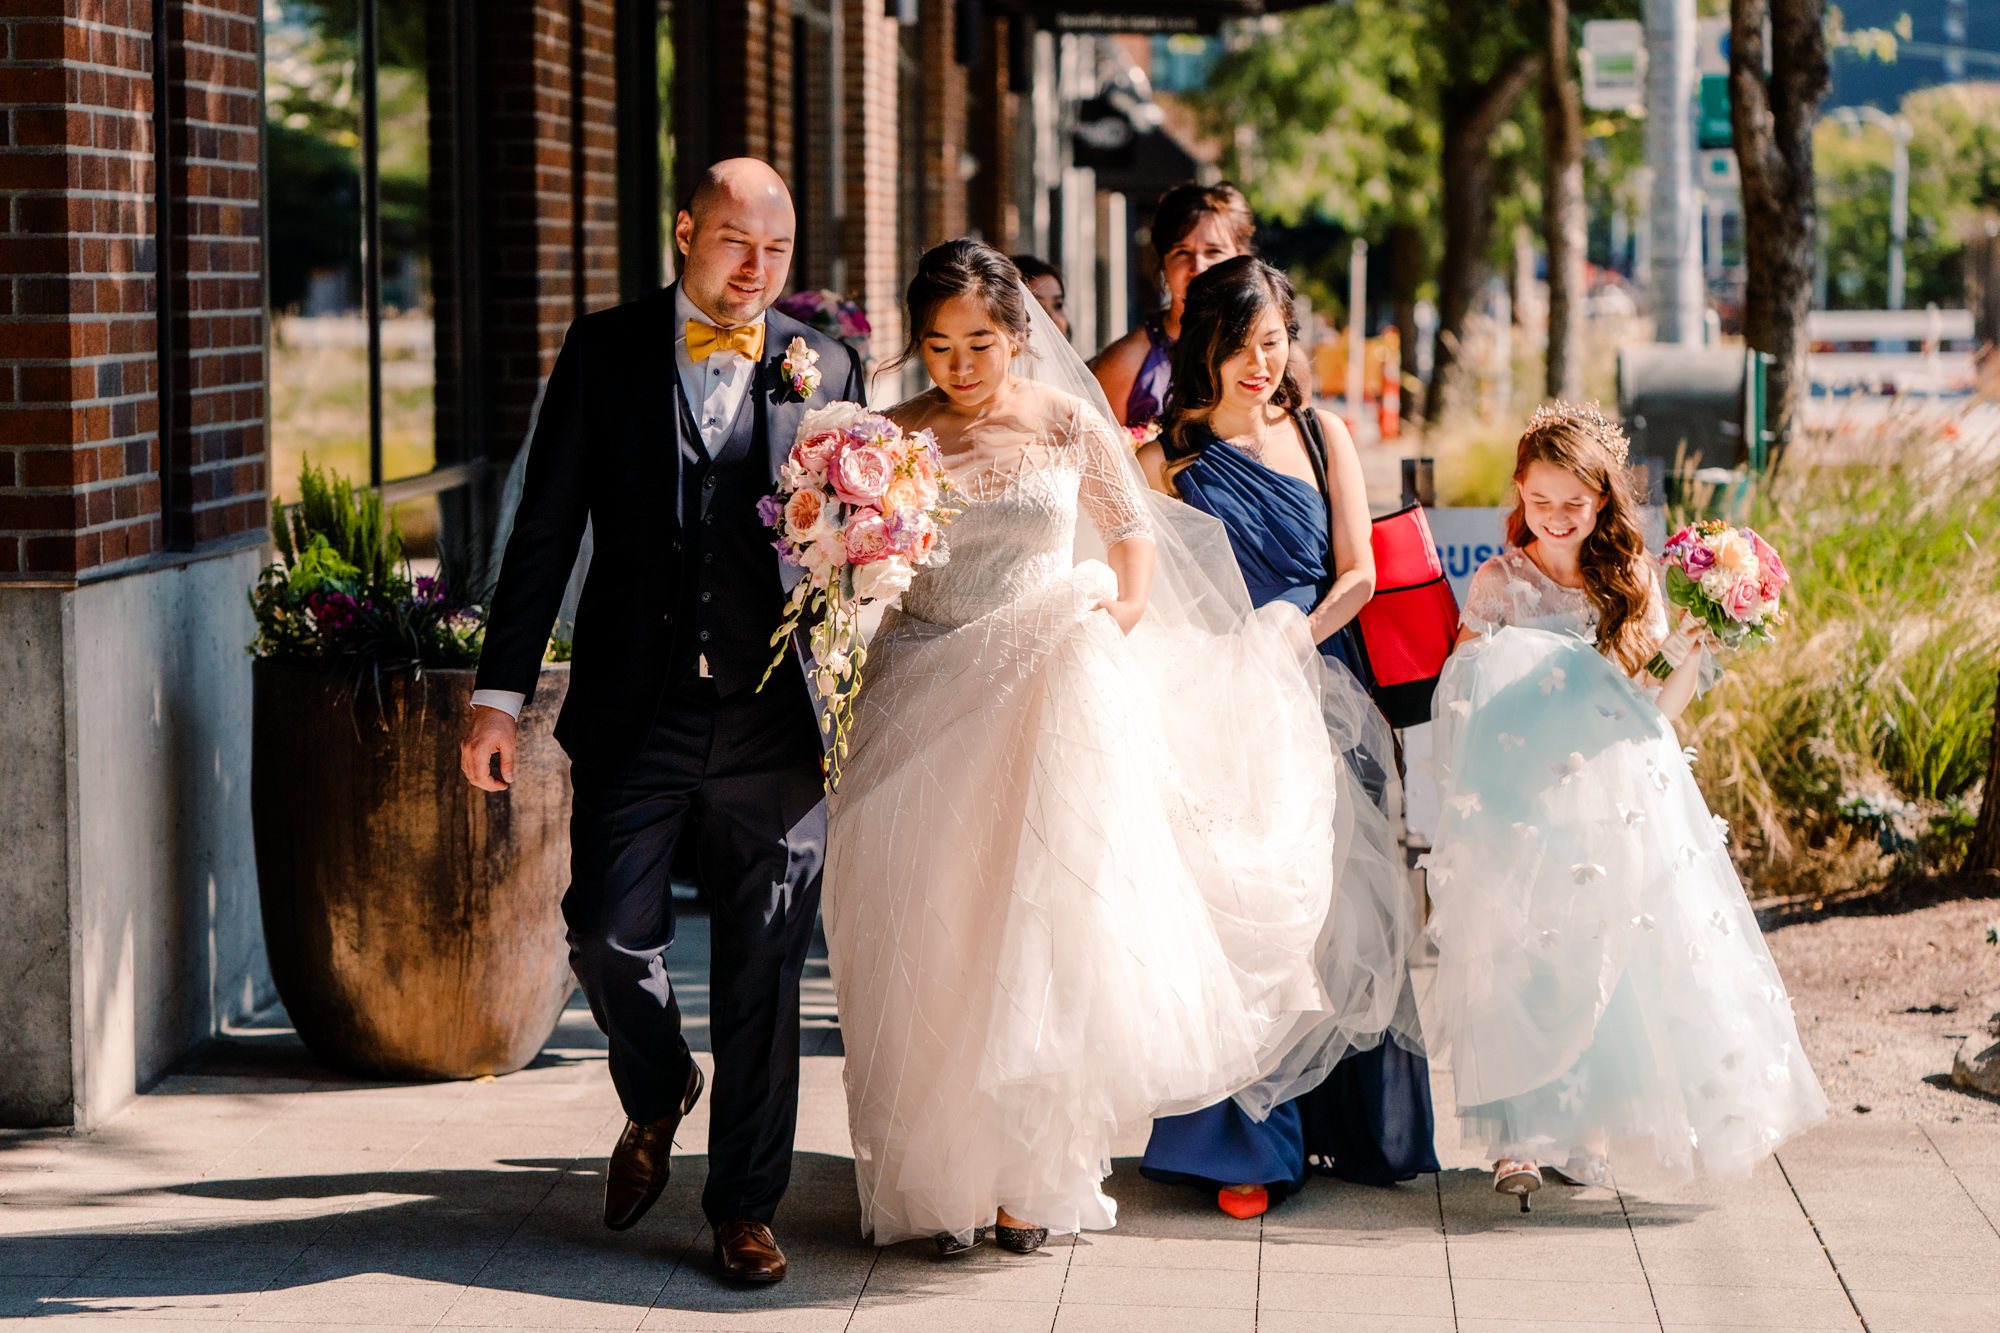 Emma and Joe walk to The Foundry with their wedding party